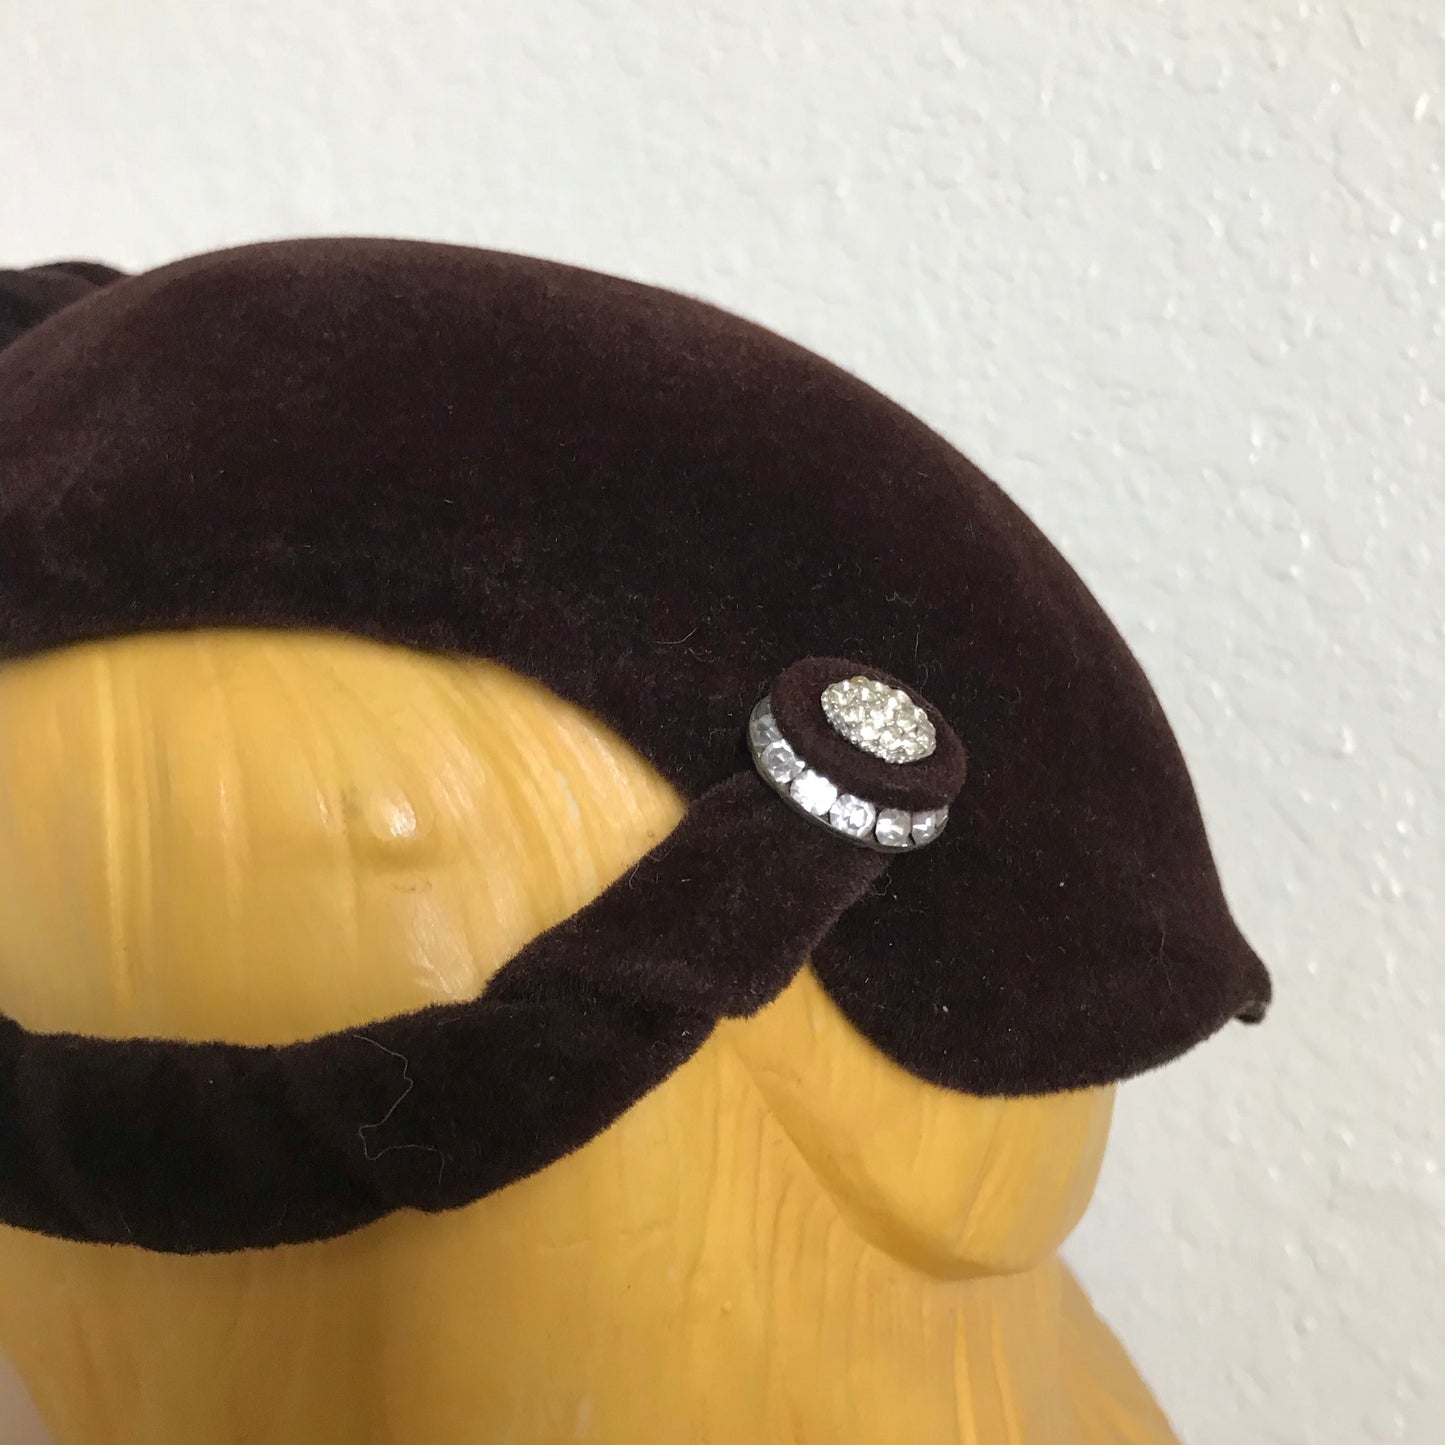 Chocolate Brown Felted Wool Elegantly Sculpted Rhinestone Accented Cocktail Hat circa 1950s